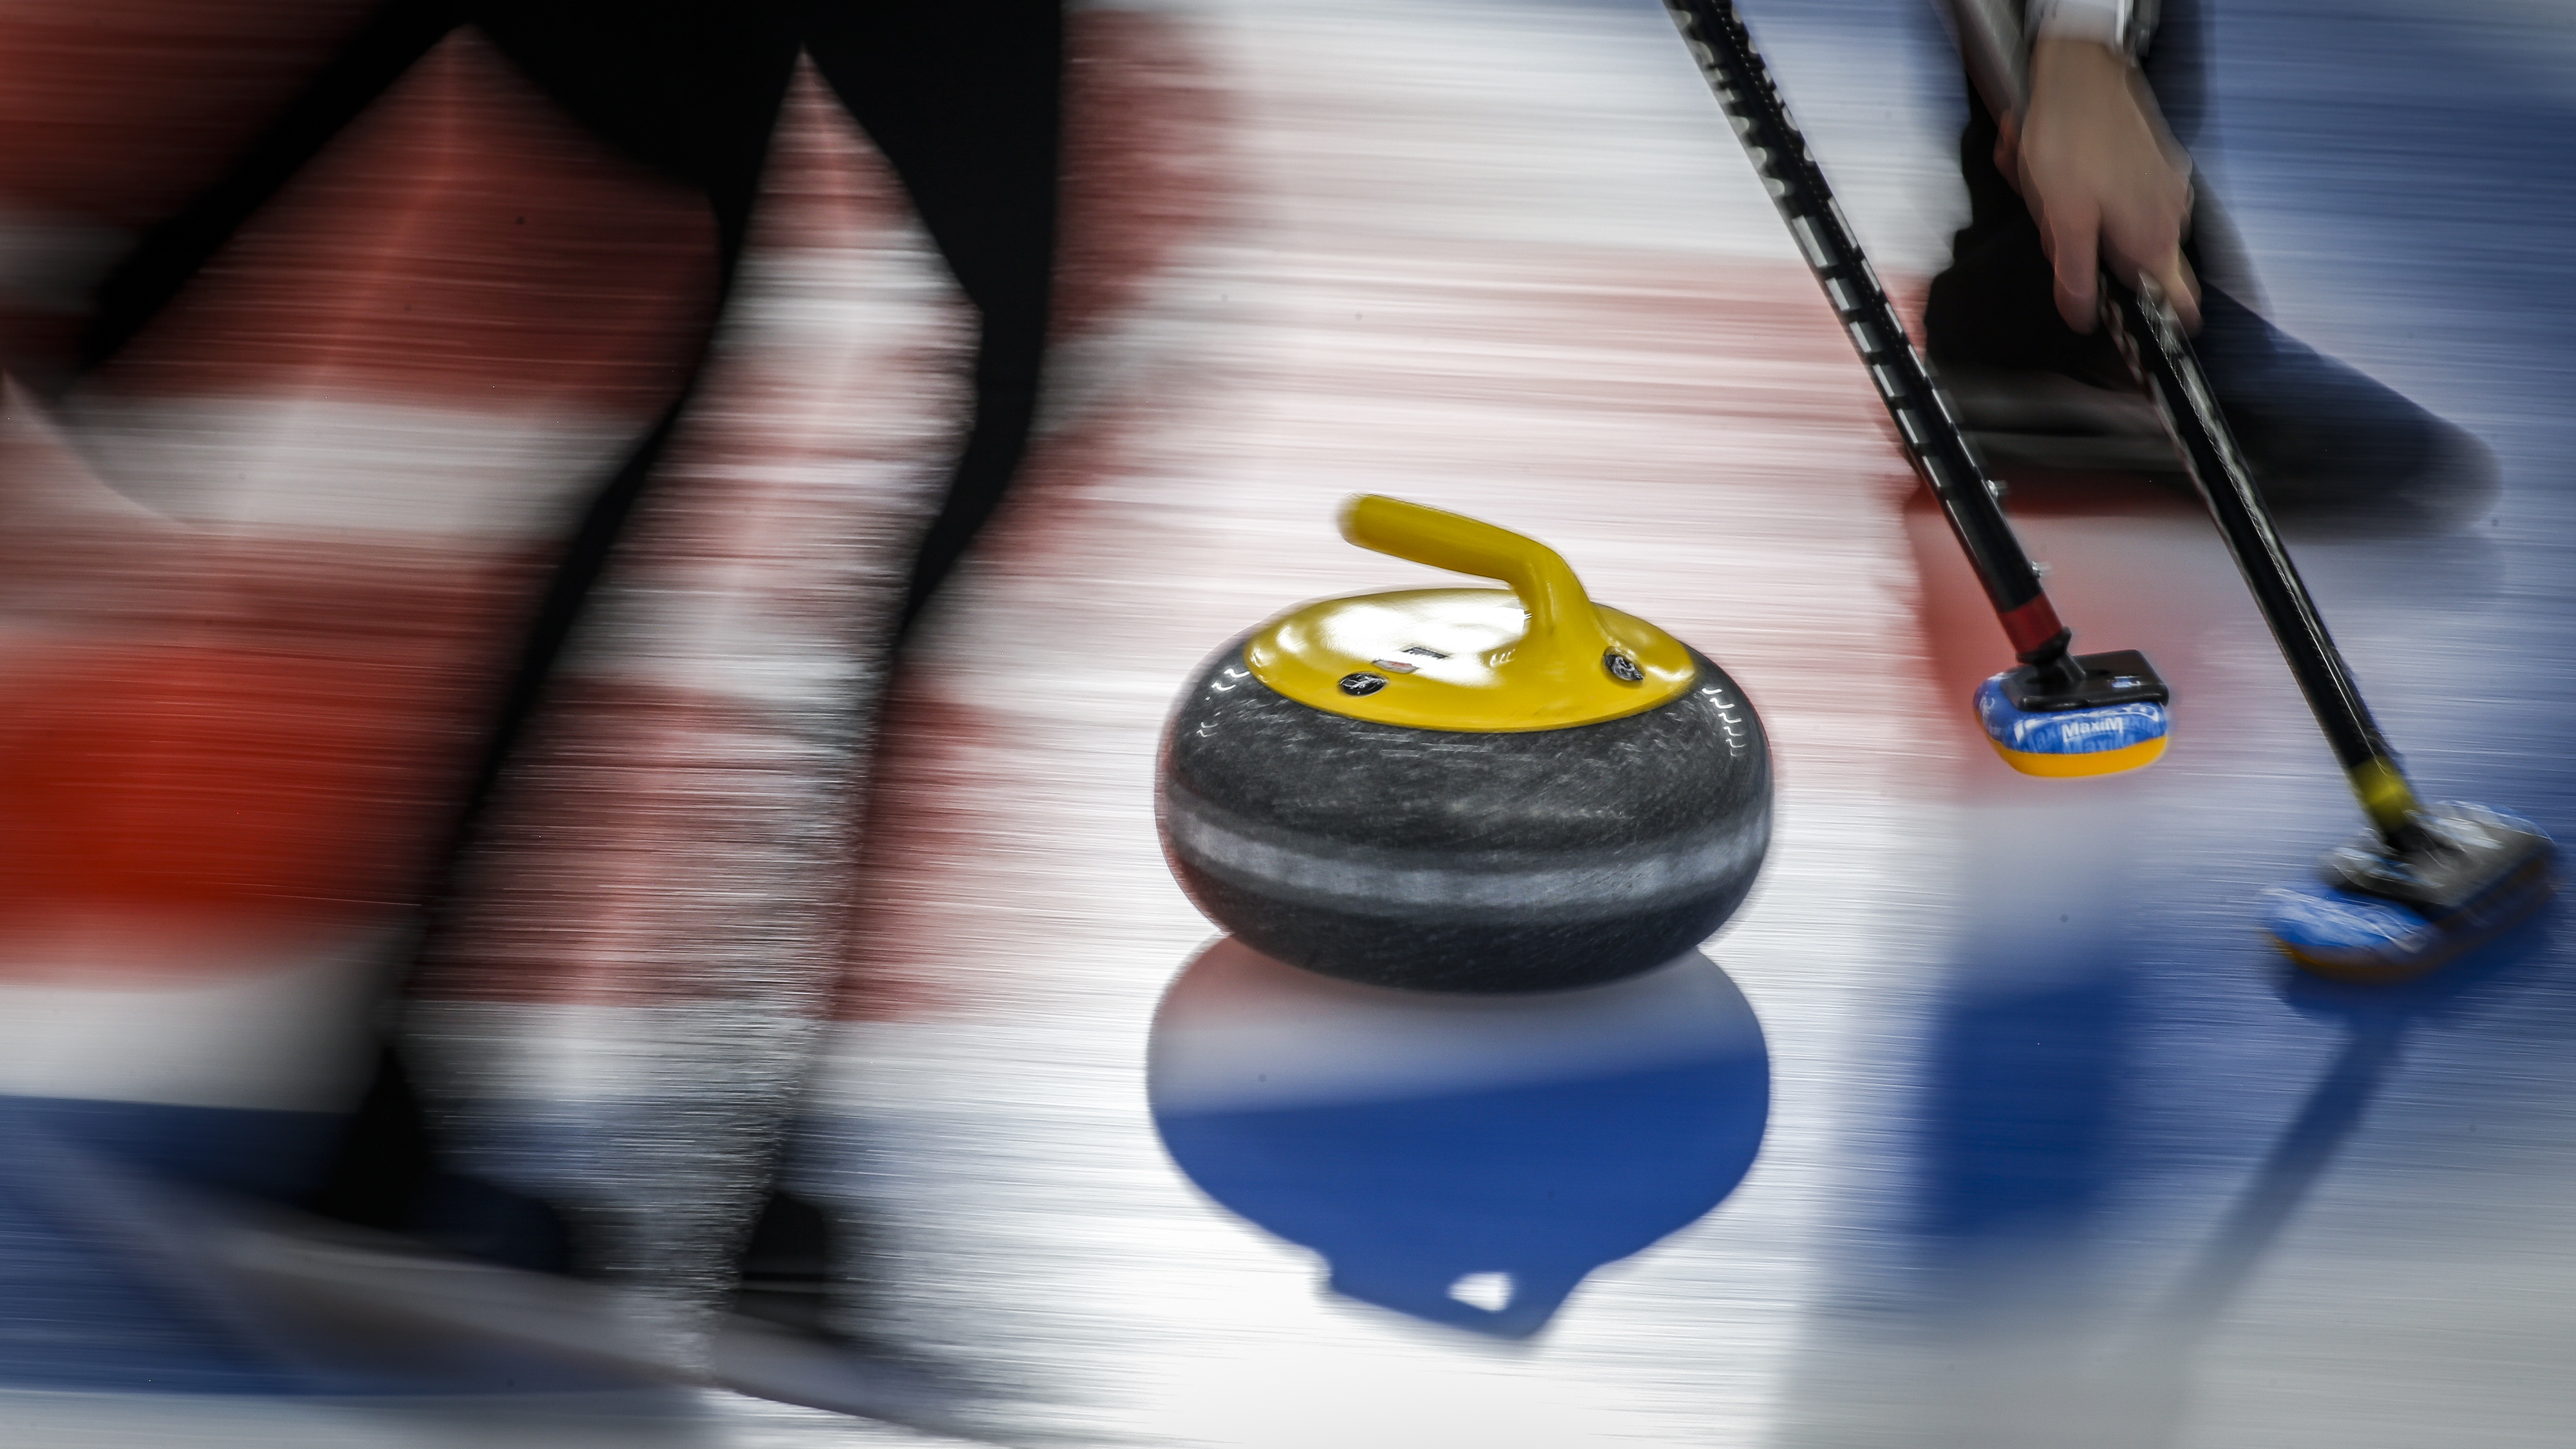 With Olympic berths on the line, intensity runs high at curling trials Globalnews.ca